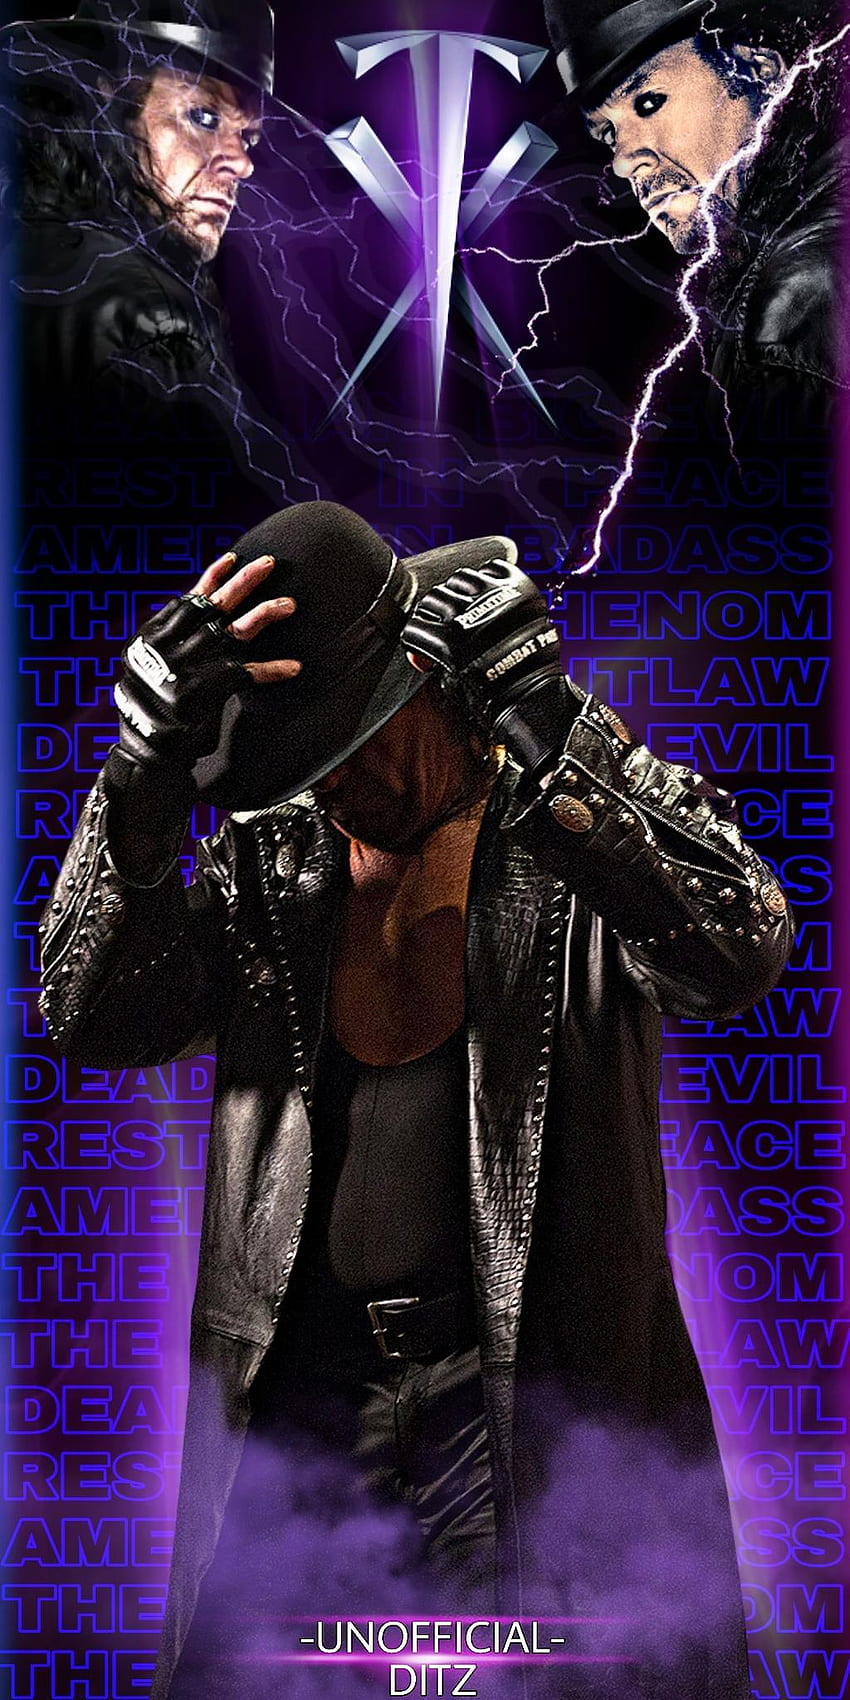 The Undertaker 2018 Wallpapers  Wallpaper Cave